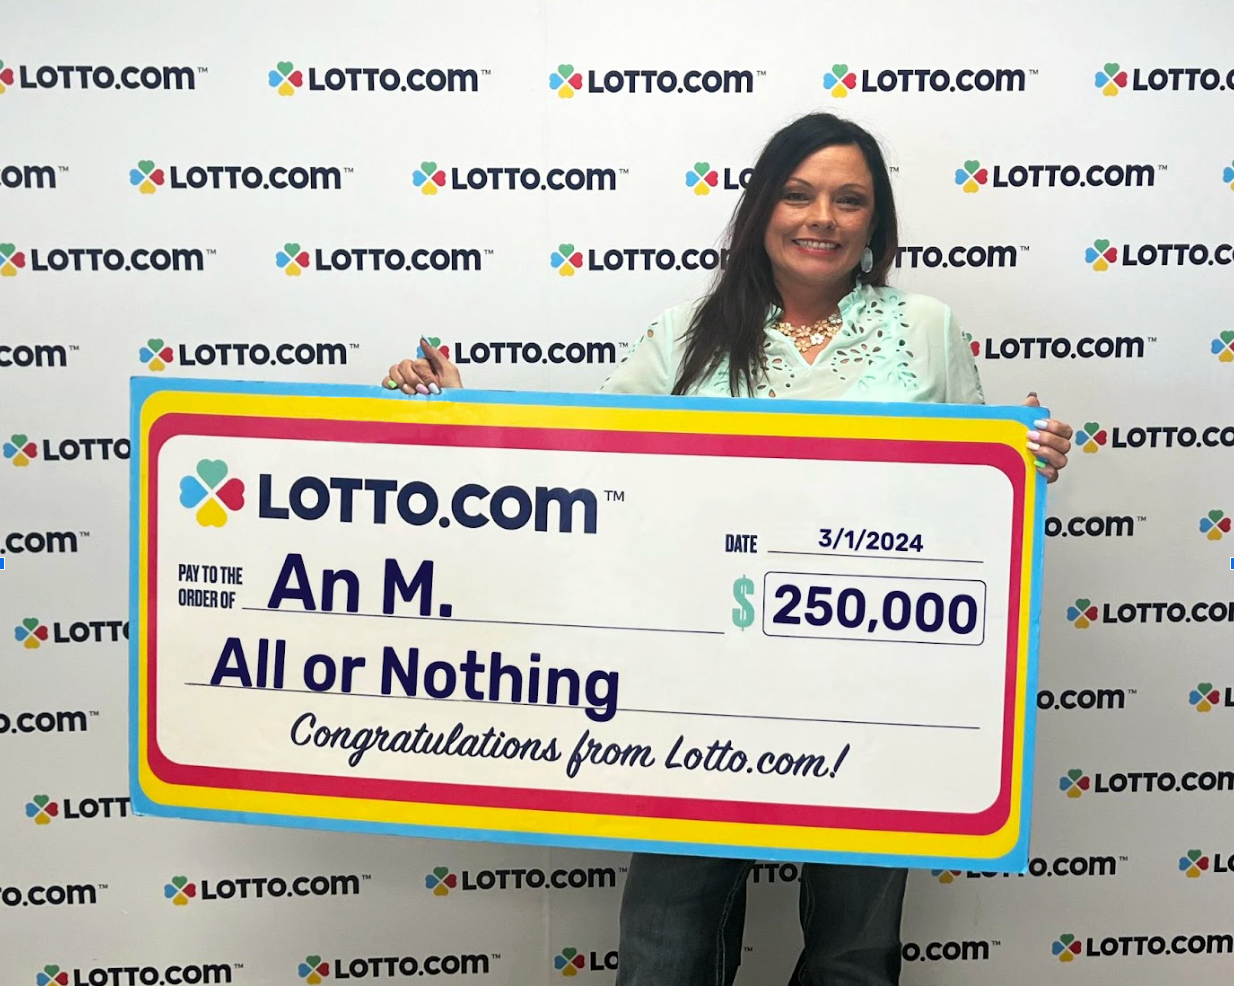 lotto.com-customer-wins-$250,000-without-matching-any-numbers-in-texas-lottery-“all-or-nothing”-game